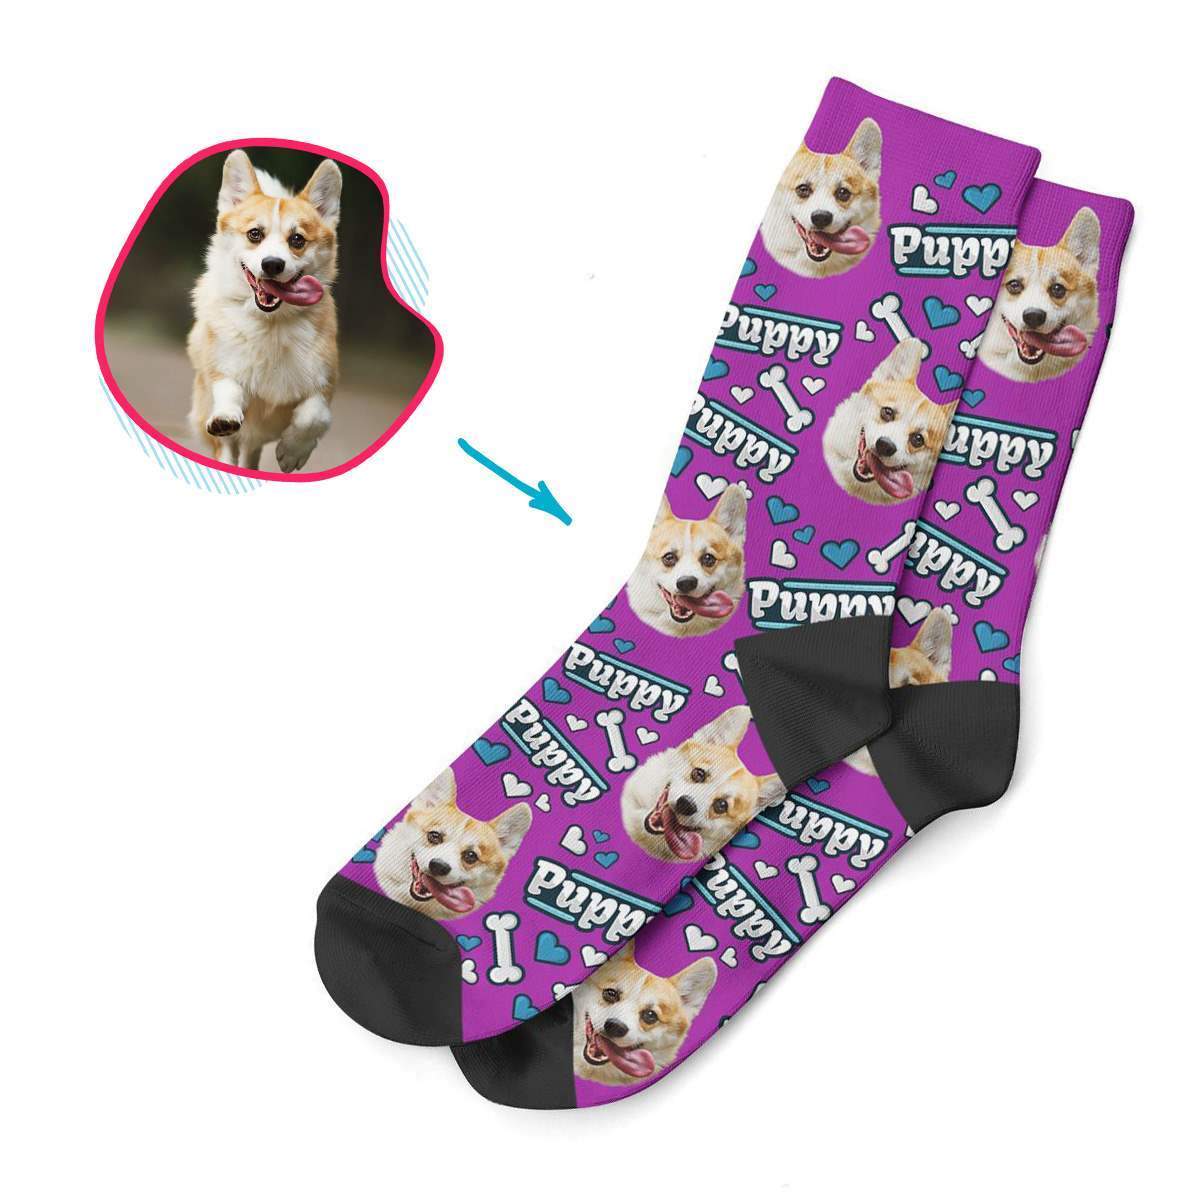 purple Puppy socks personalized with photo of face printed on them